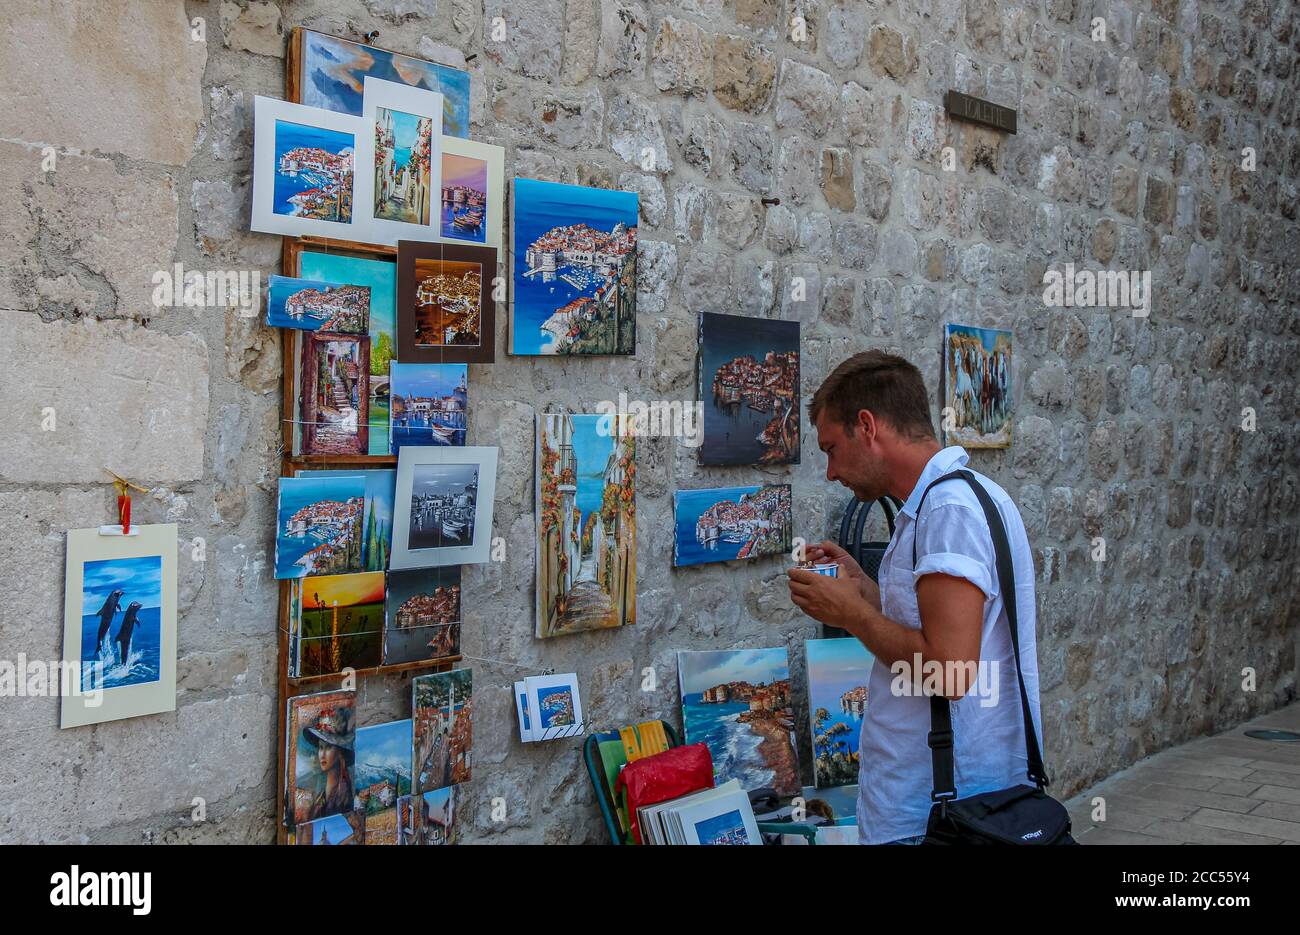 Dubrovnik, Croatia - July 15th 2018: A tourist eating ice cream, admiring artwork in Dubrovnik's historic old town in summer, Croatia Stock Photo